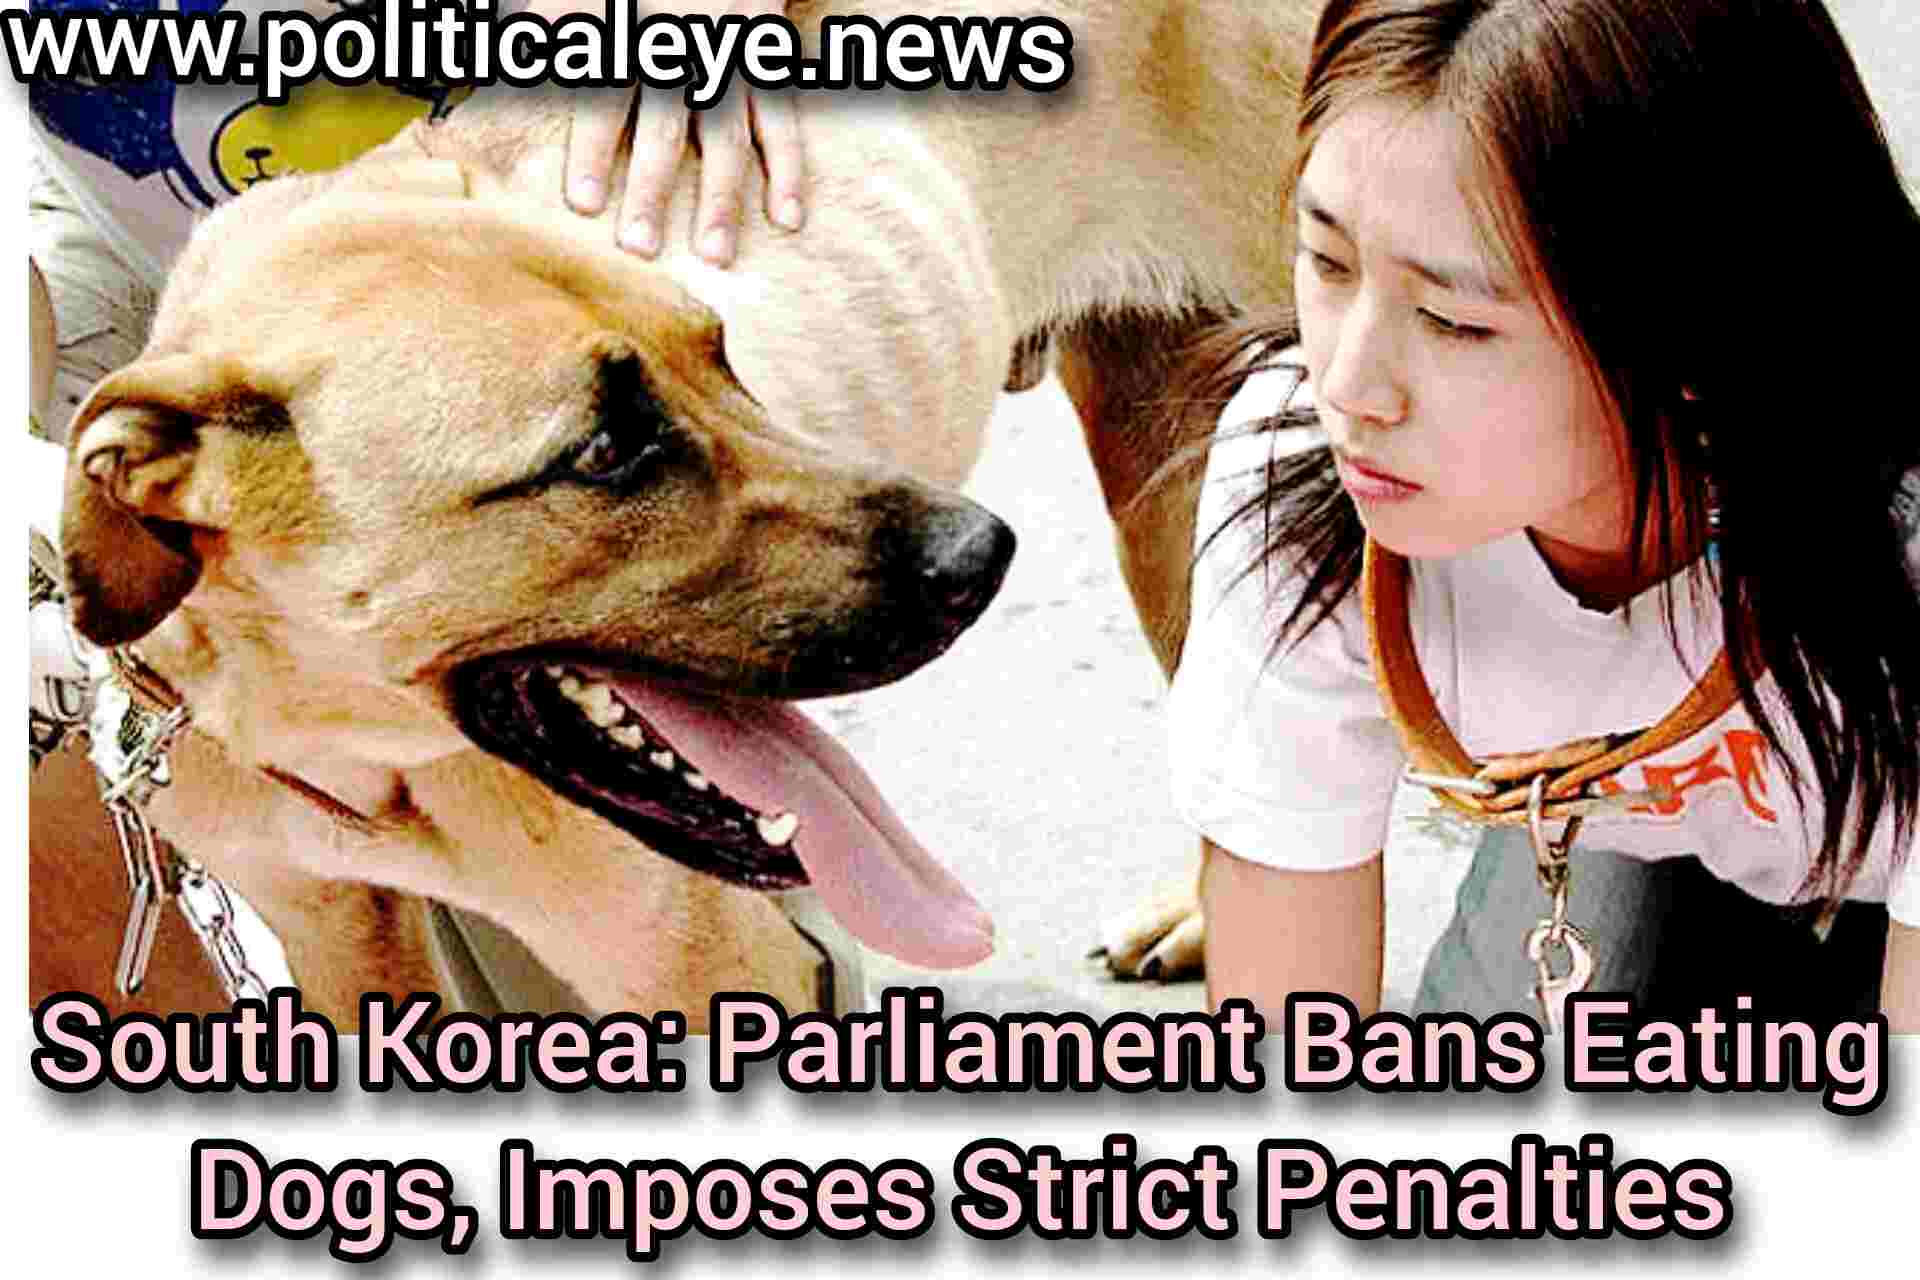 Historic Move in South Korea Parliament Bans Eating Dogs Imposes Strict Penalties; #southkoriya,